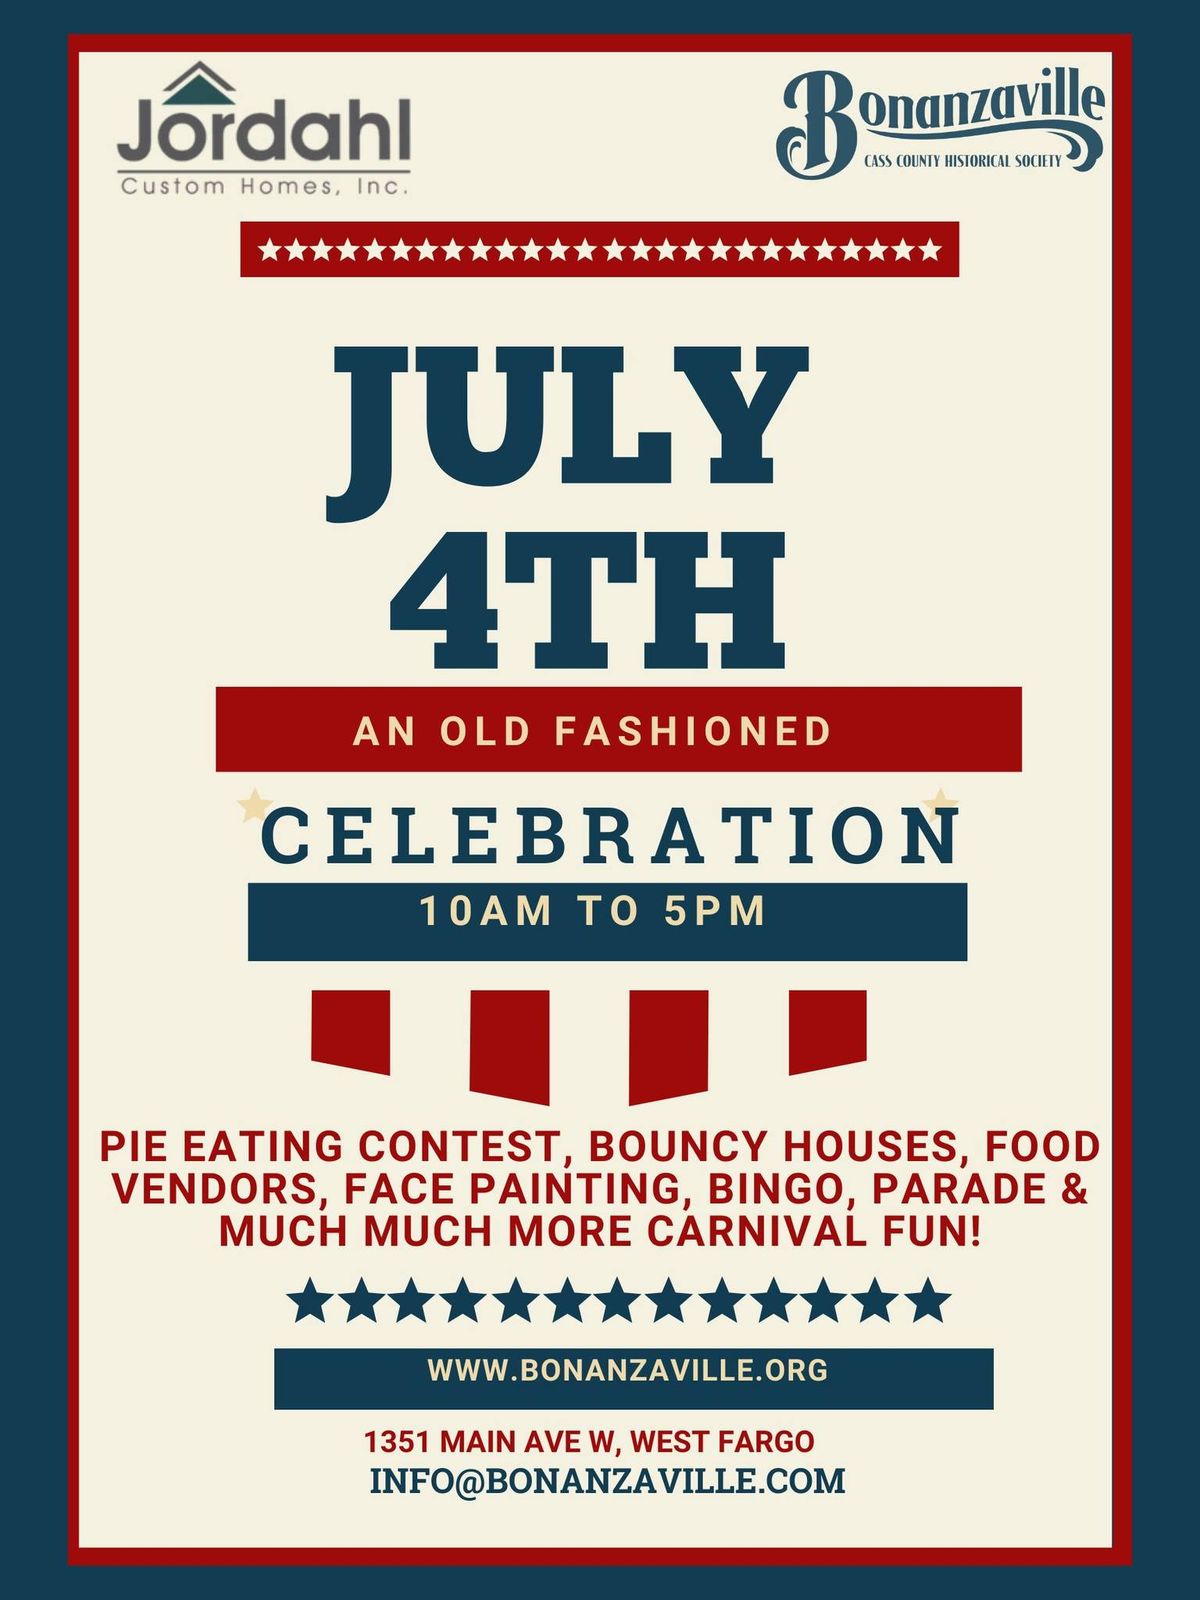 4th Of July-An Old Fashioned Celebration at Bonanzaville!